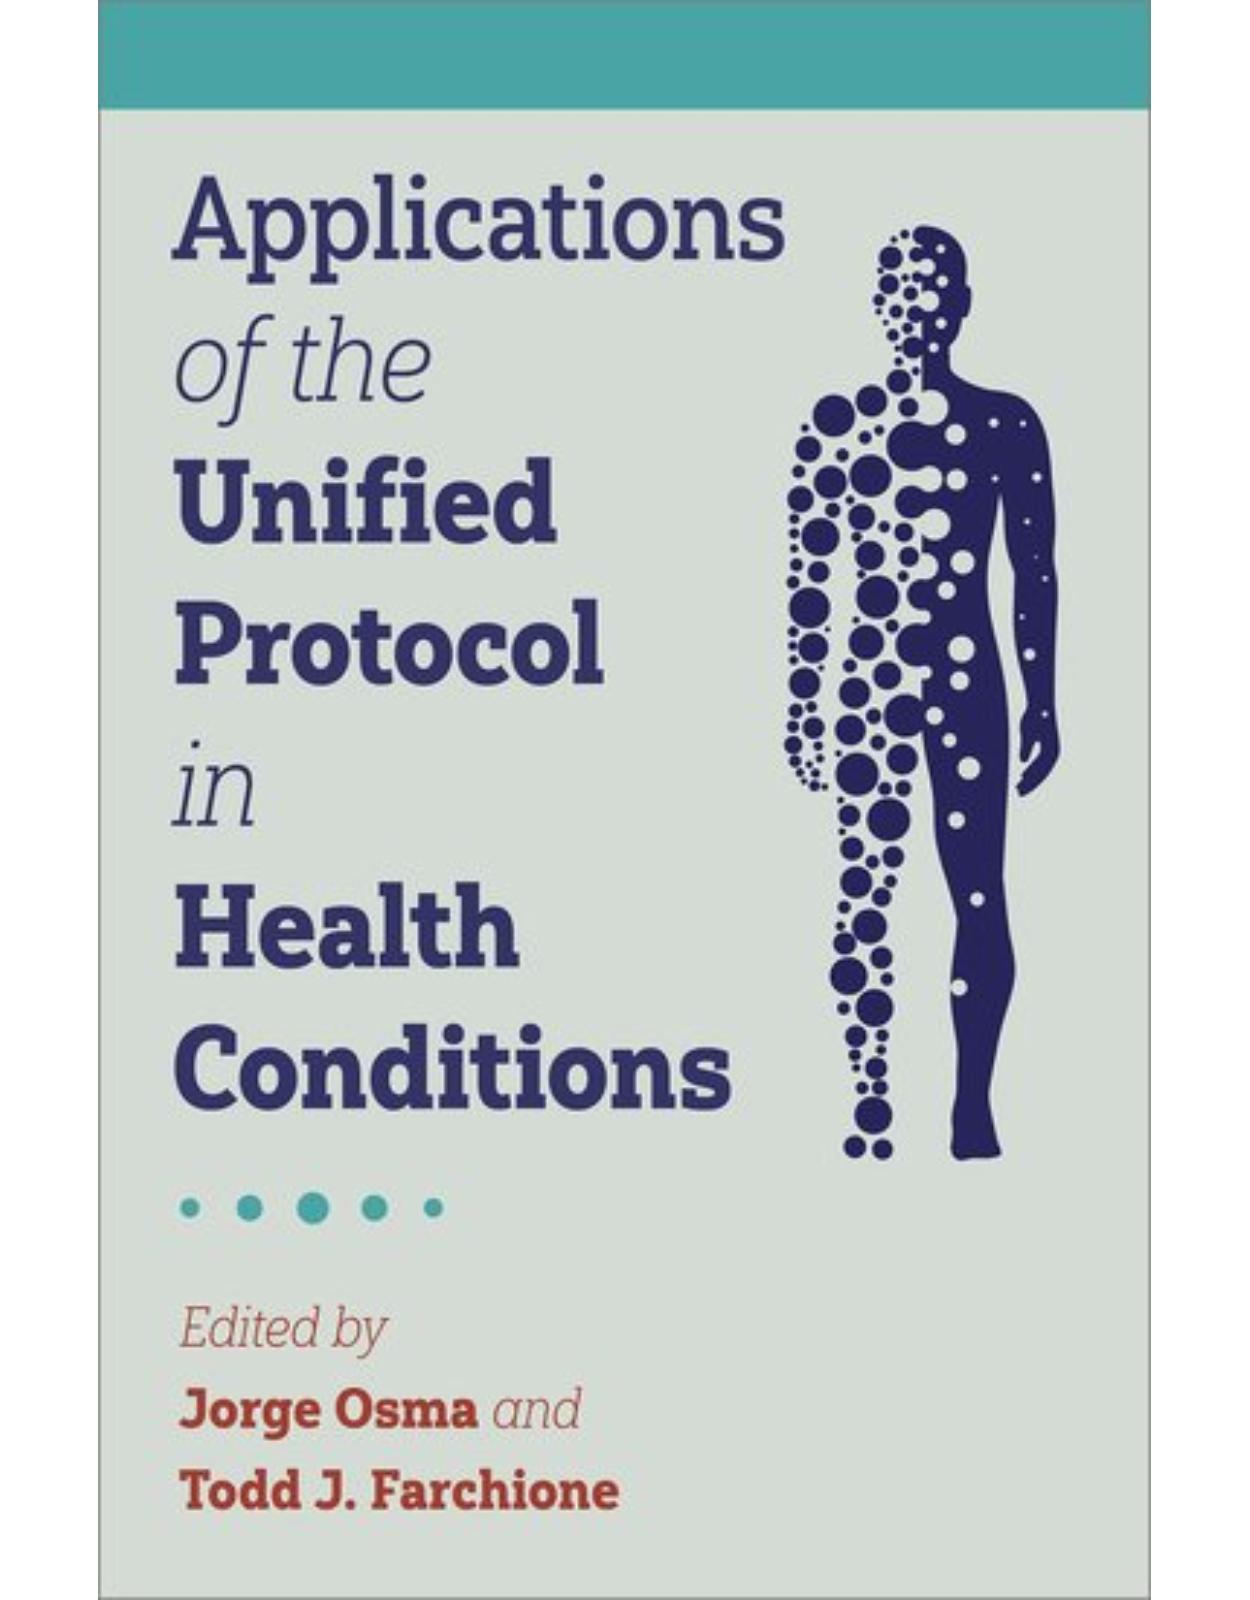 Applications of the Unified Protocol in Health Conditions